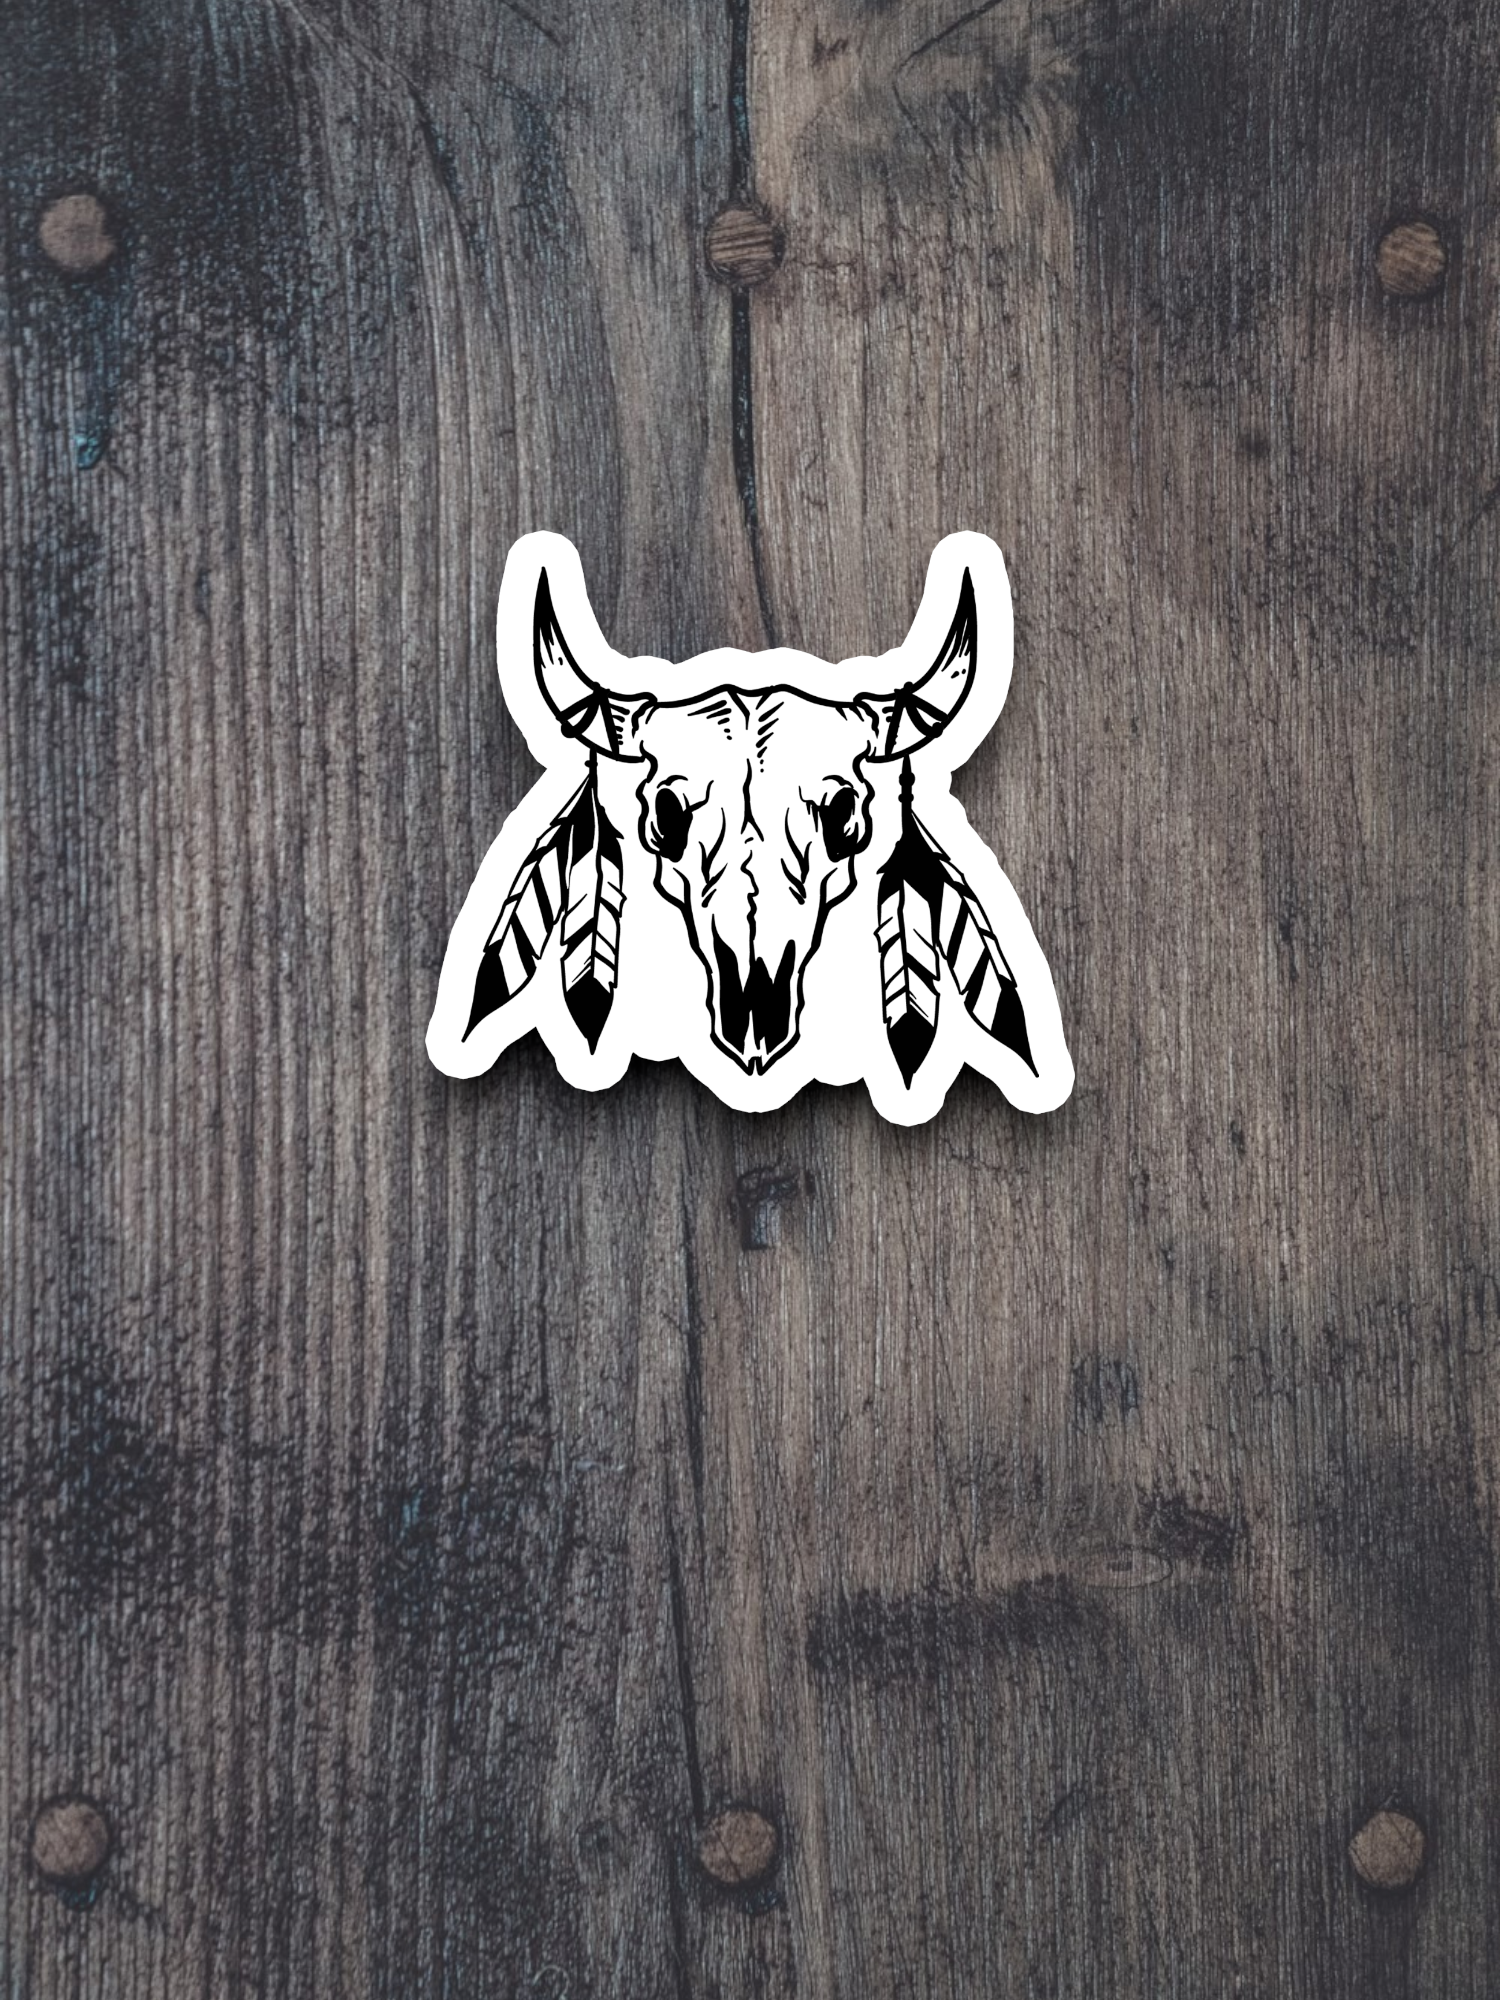 Bull Skull and Feathers Sticker